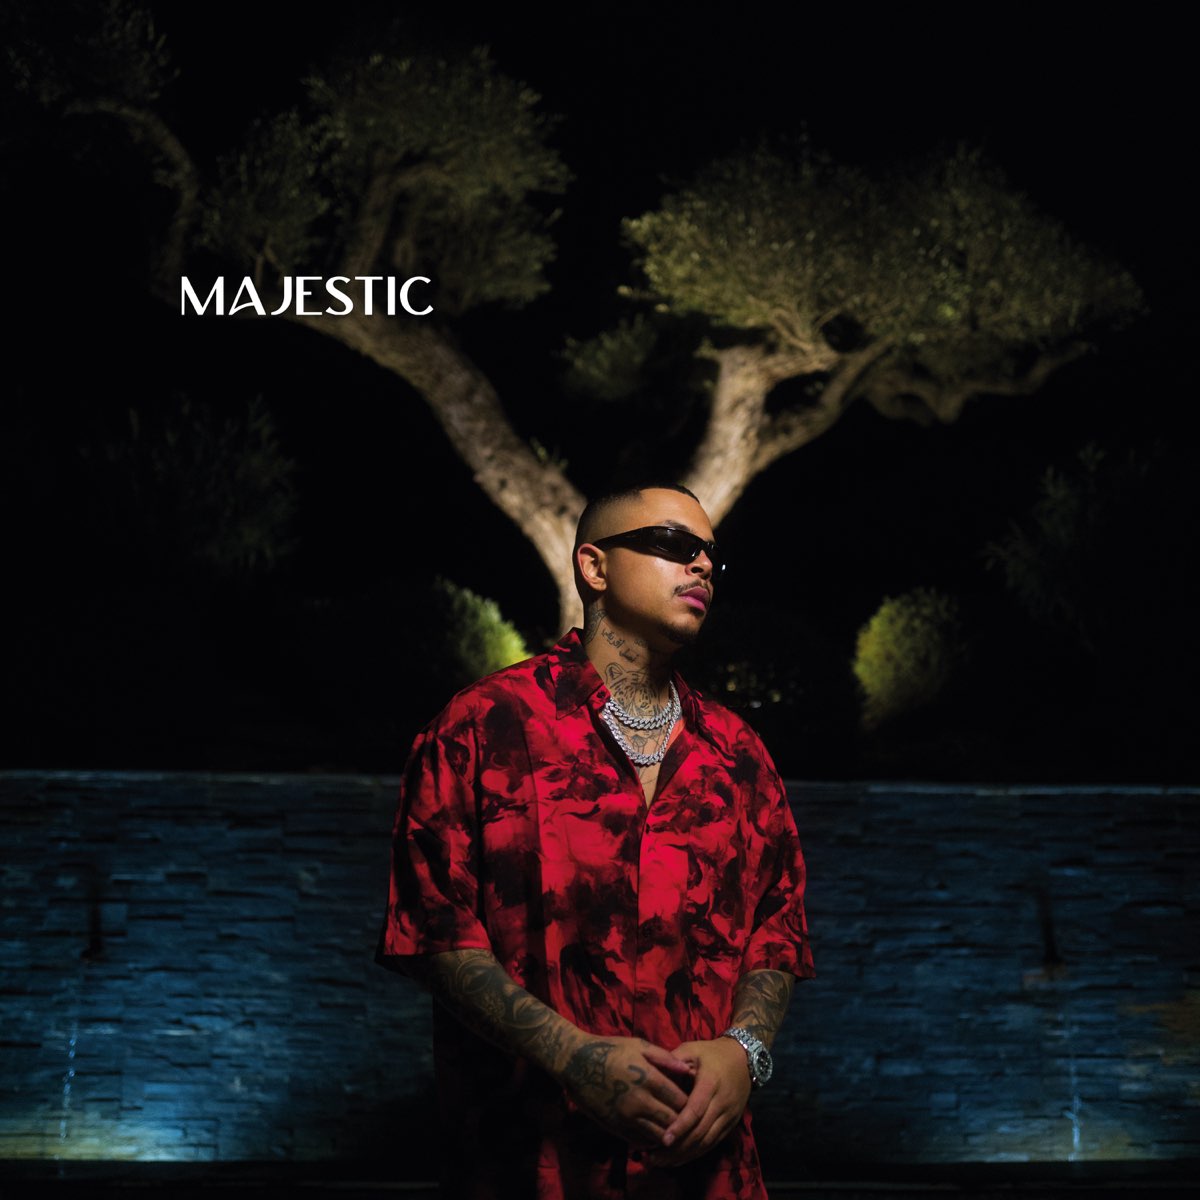 Majestic - Single by Luciano on Apple Music